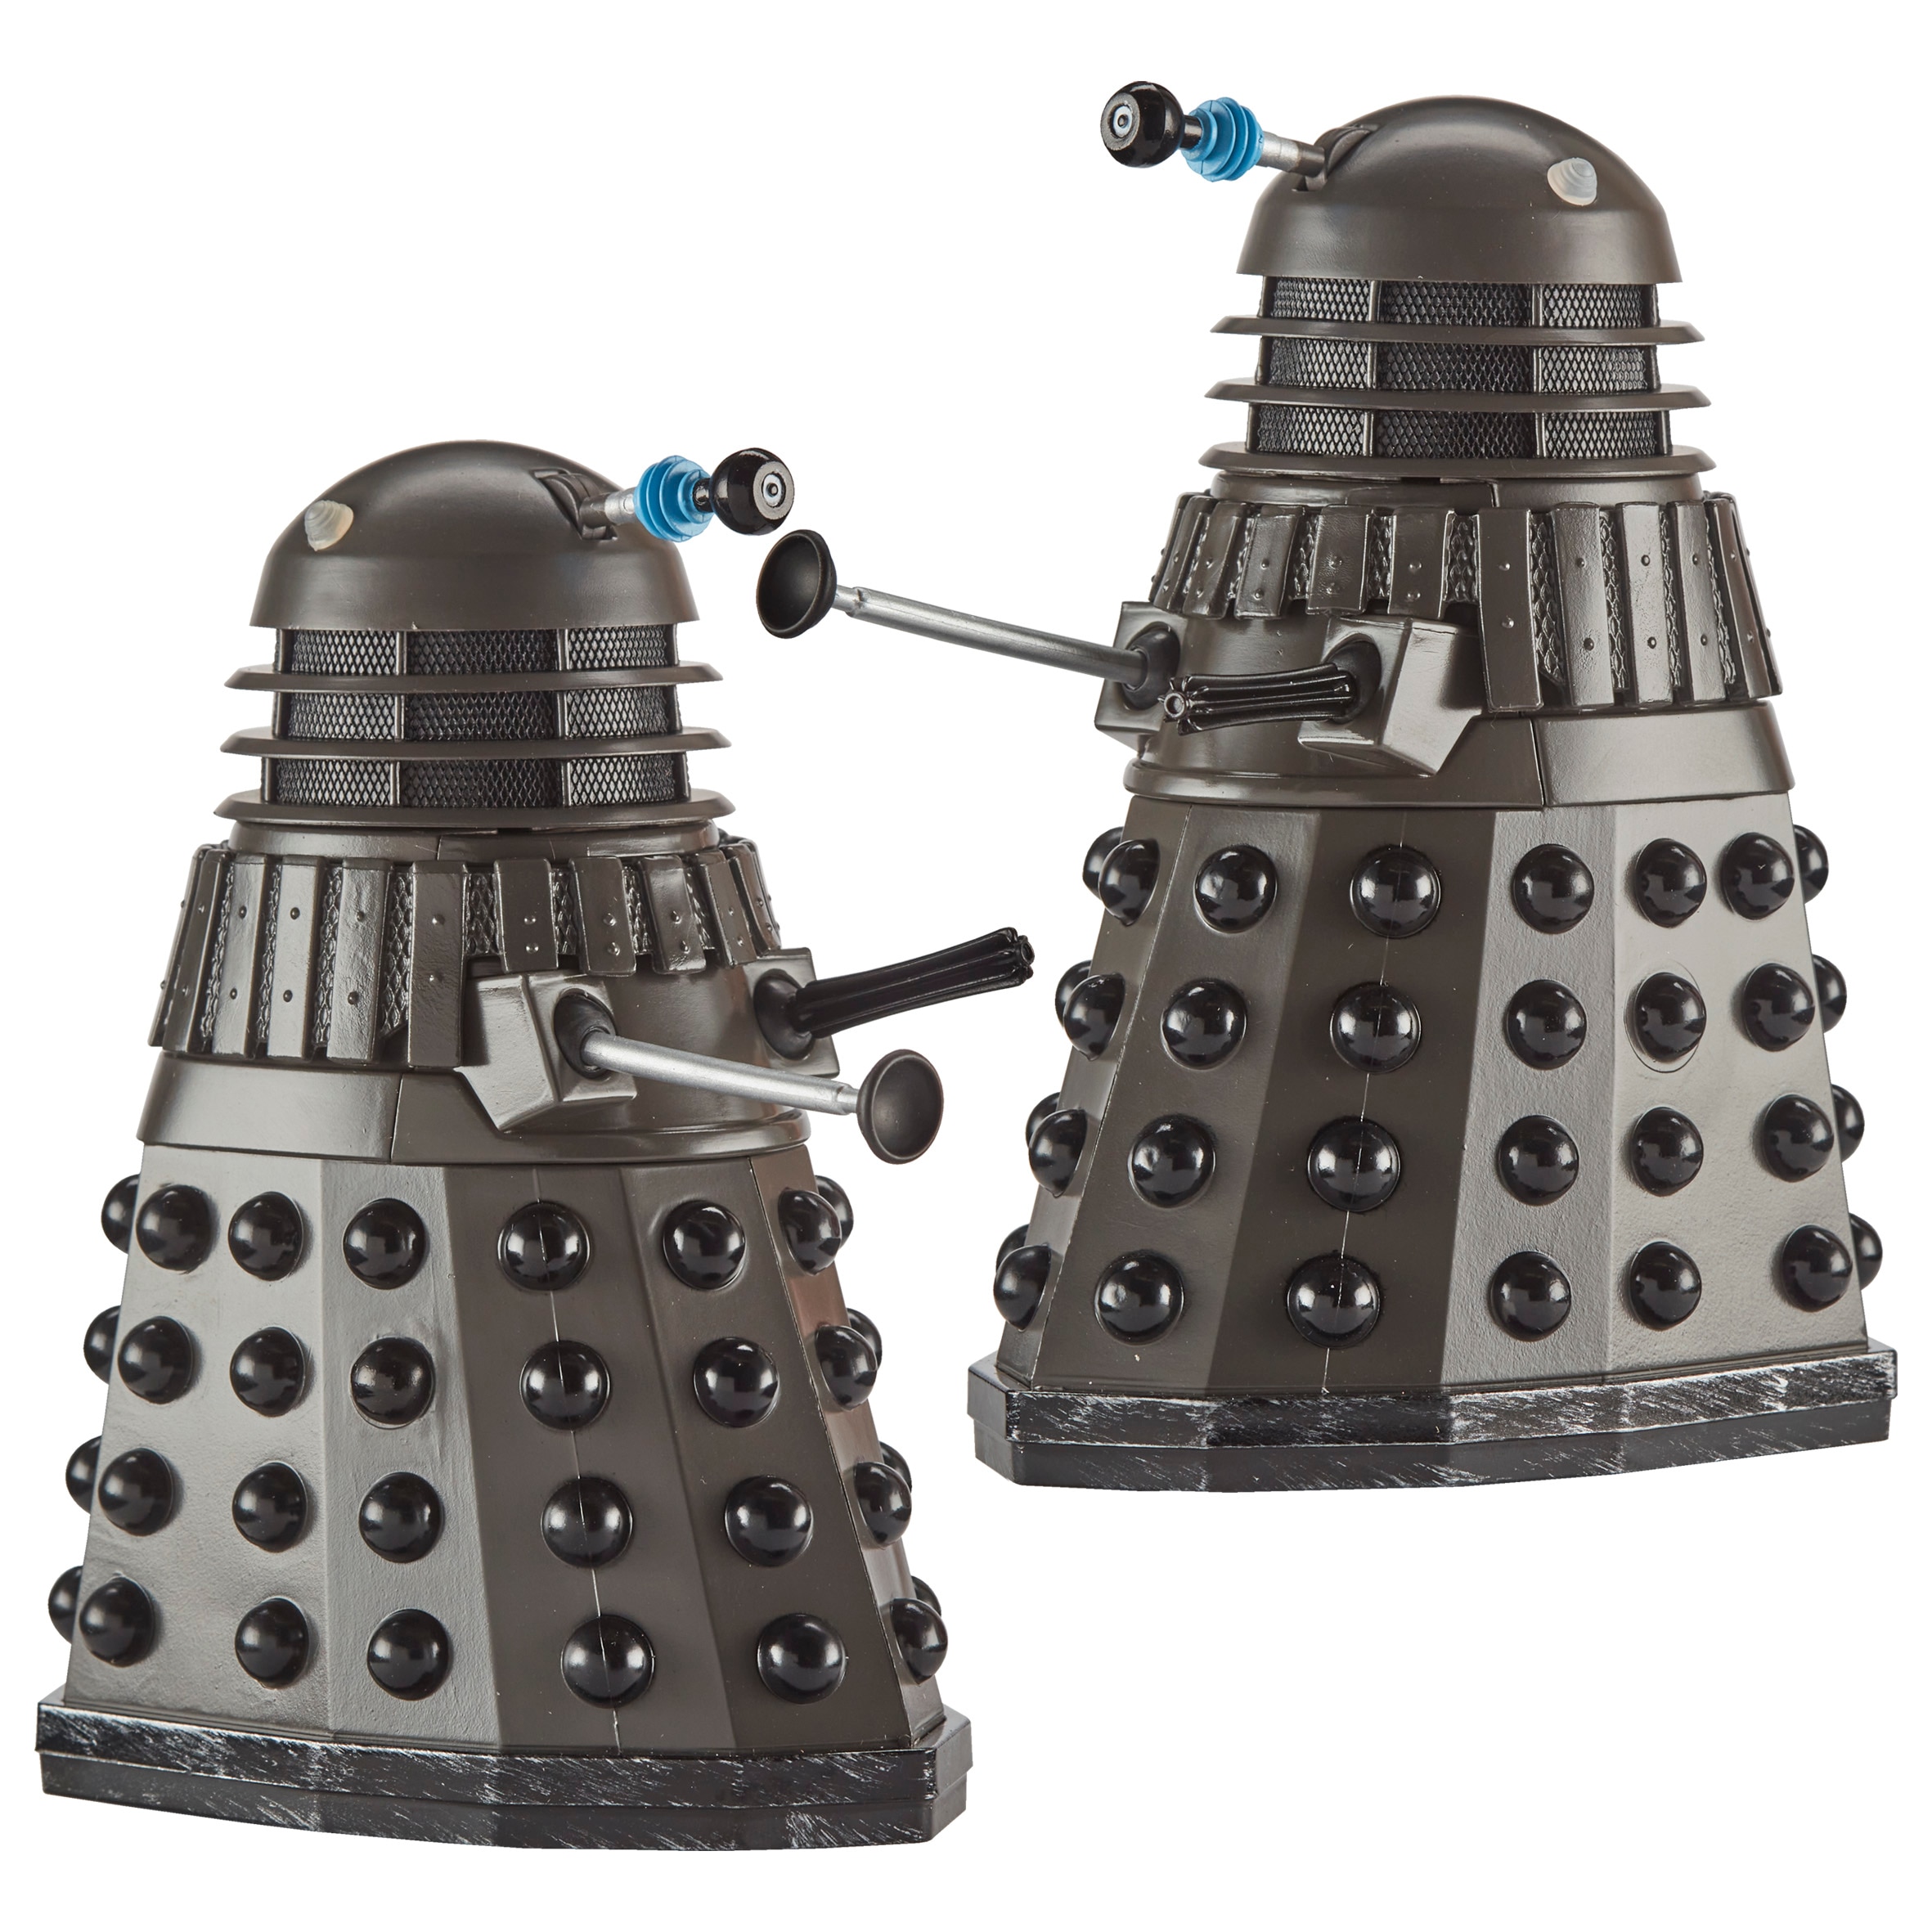 Doctor Who History of the Daleks #11 Collector Figure Set